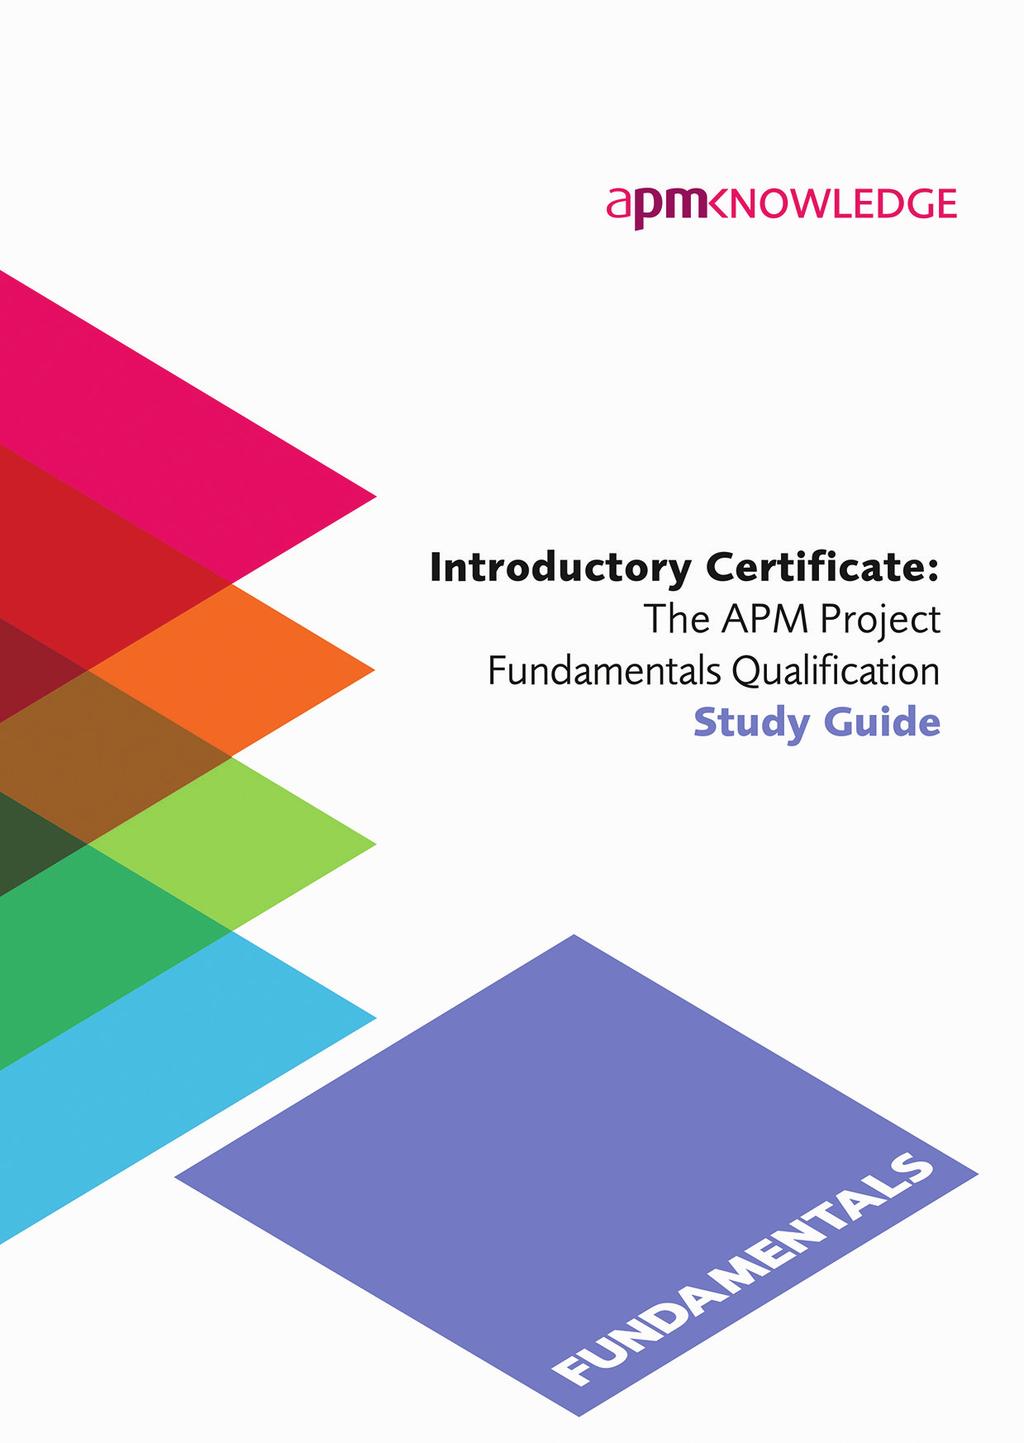 Study guides available NEW Introductory Certificate: The APM Project Fundamentals Qualification A clearly defined set of learning objectives at the start of each section.